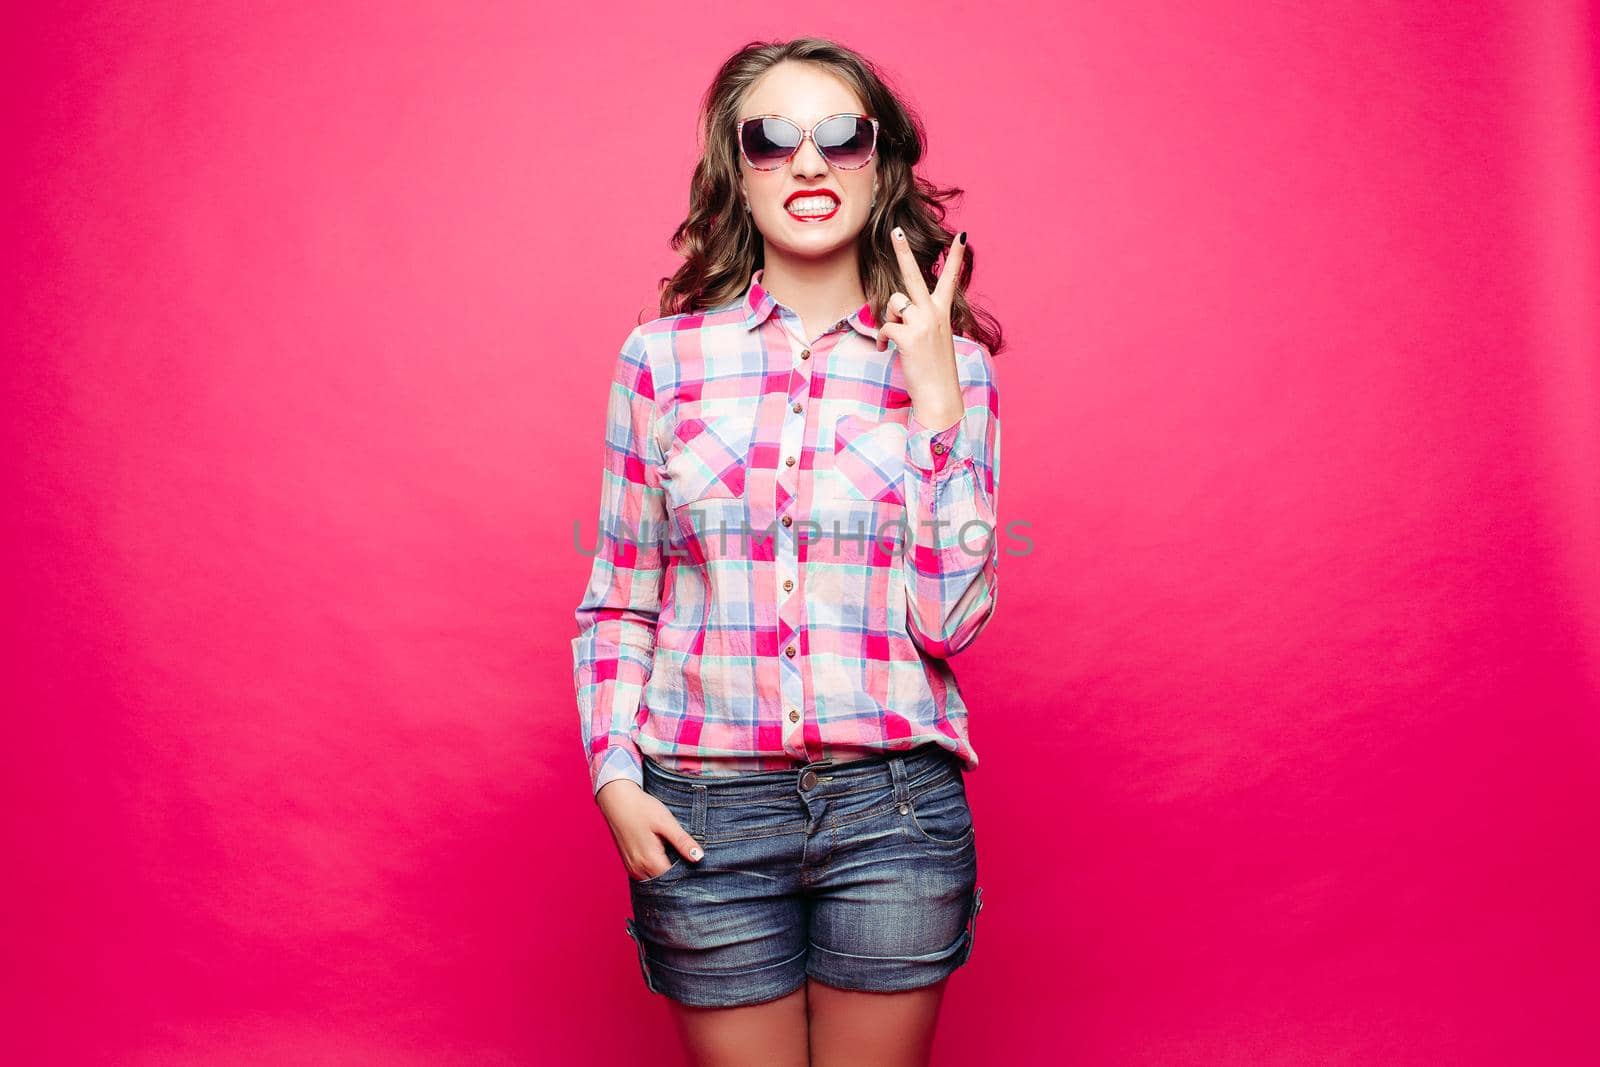 Studio portrait of funny girl in sunglasses showing peace sign with bare teeth over bright magenta background. Isolate.